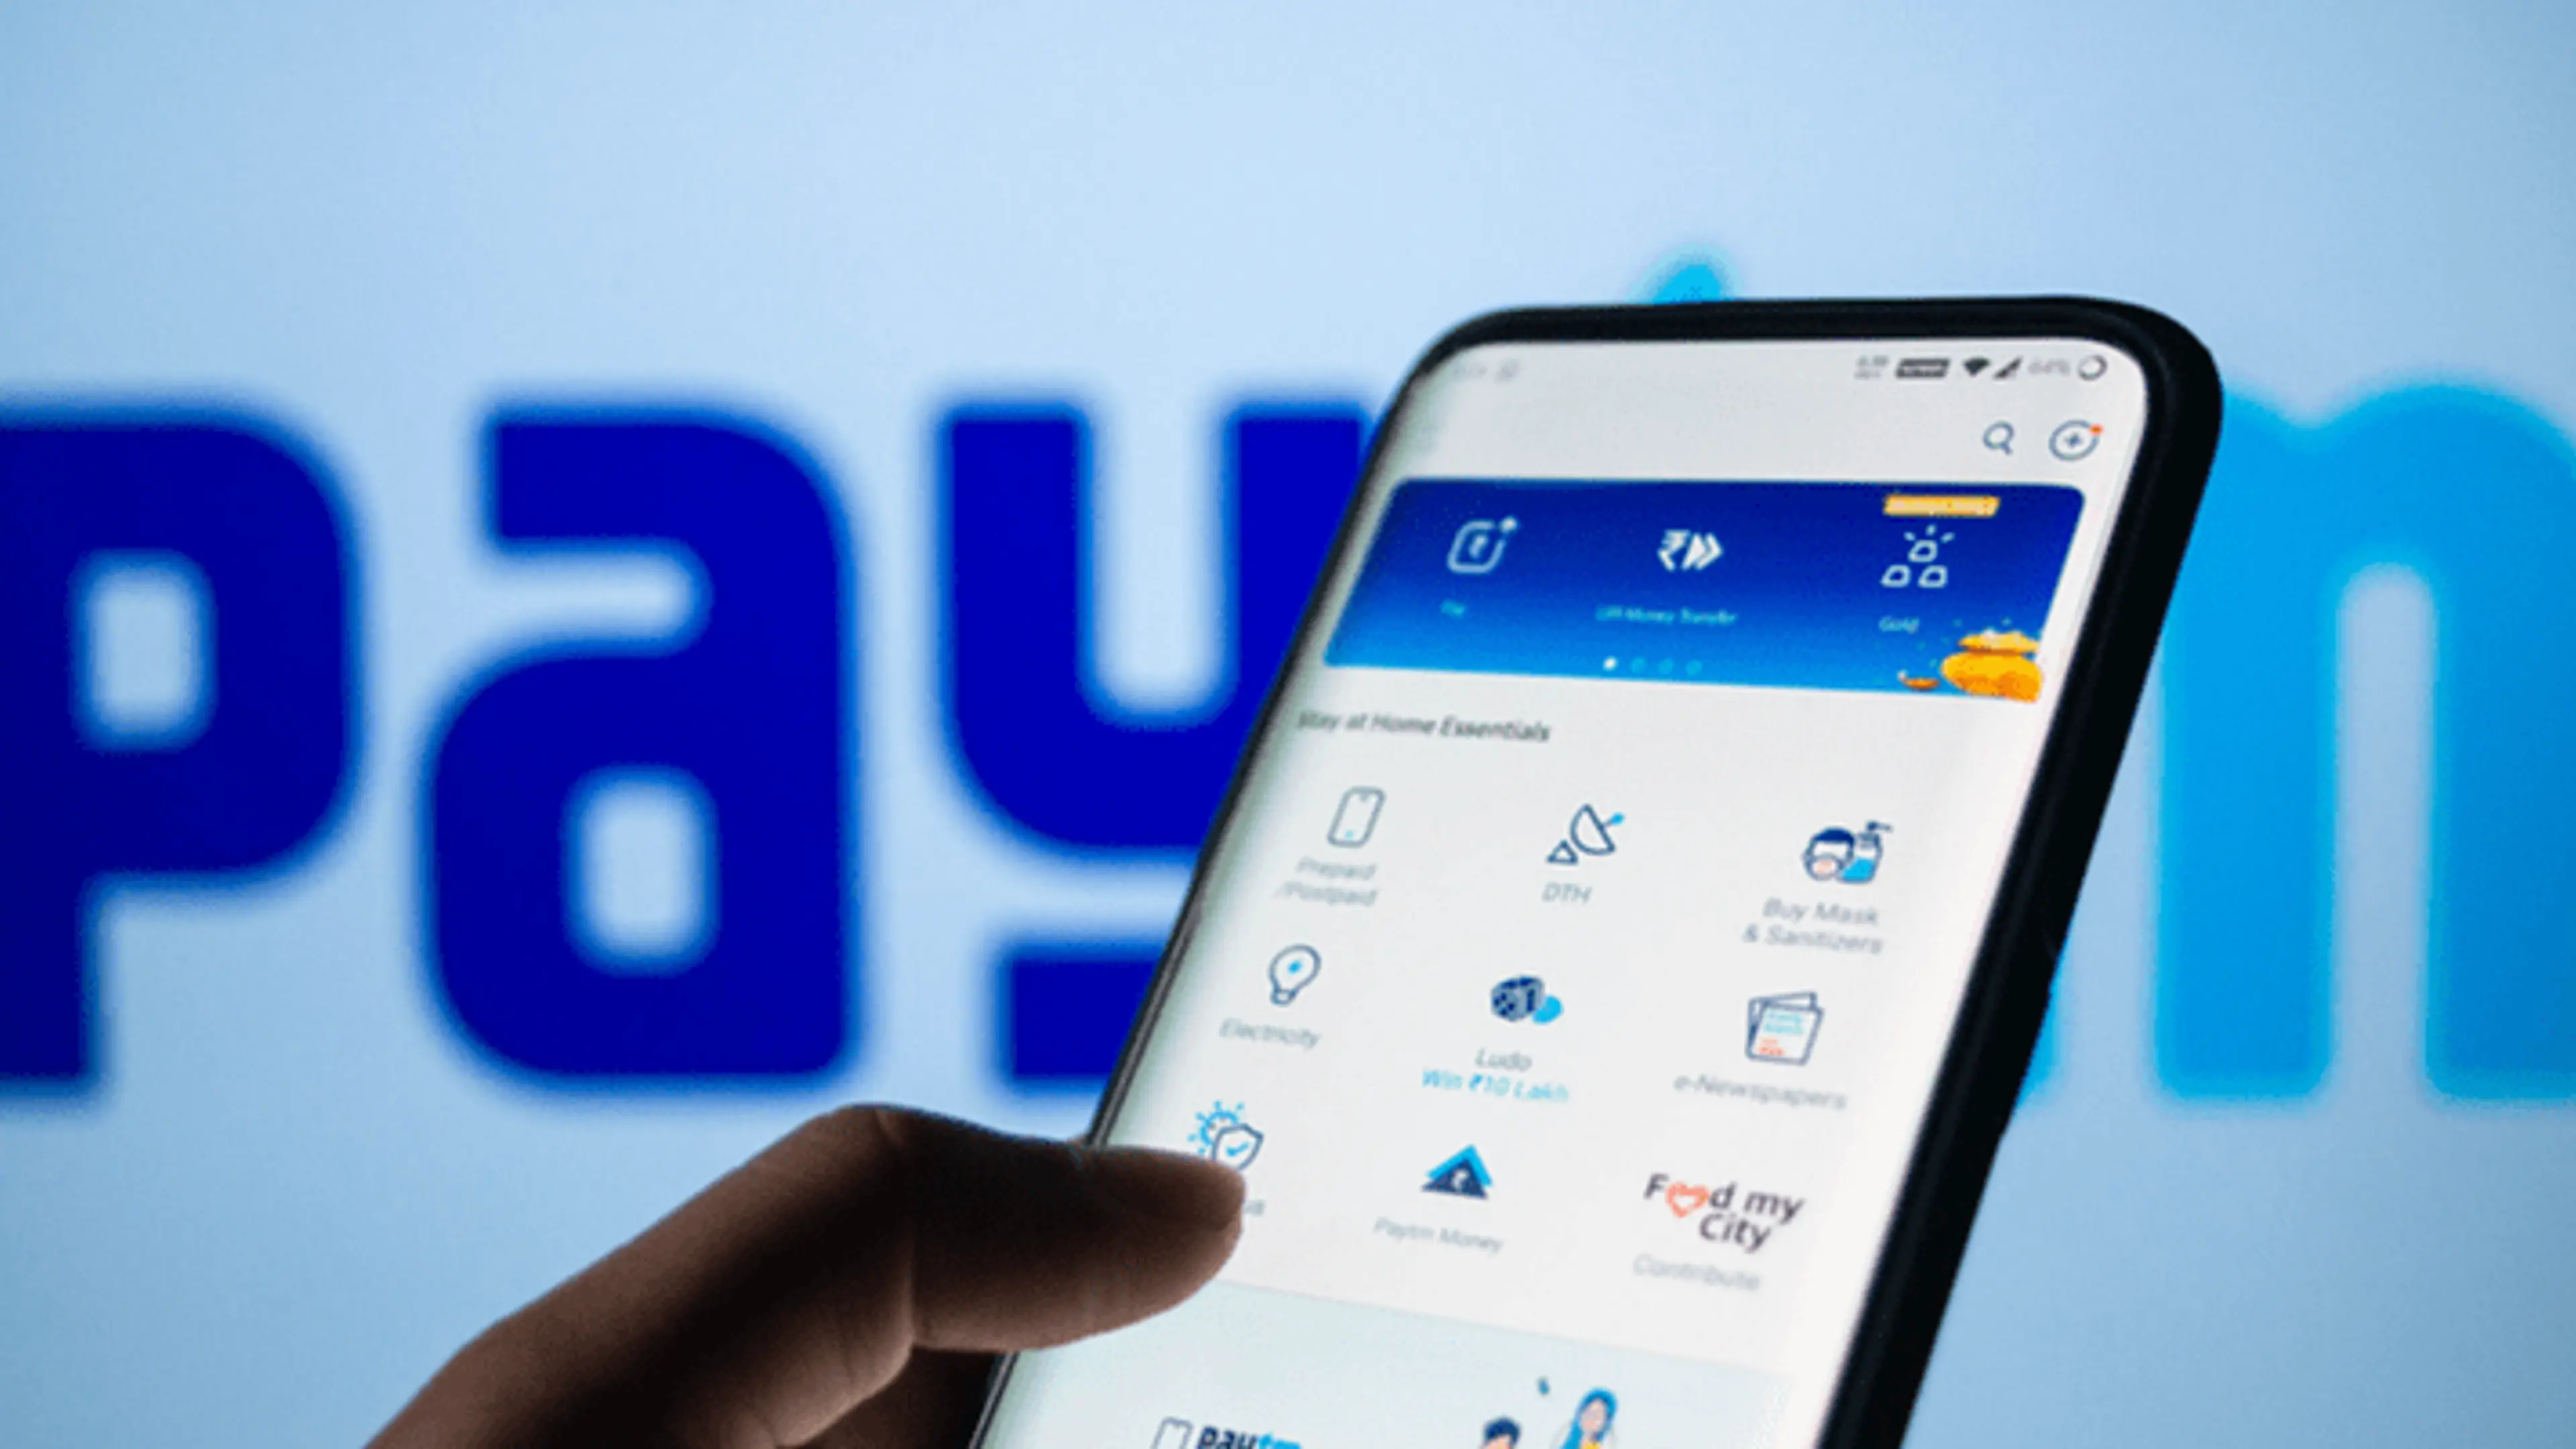 Paytm lays off employees as part of restructuring, facilitates outplacement support